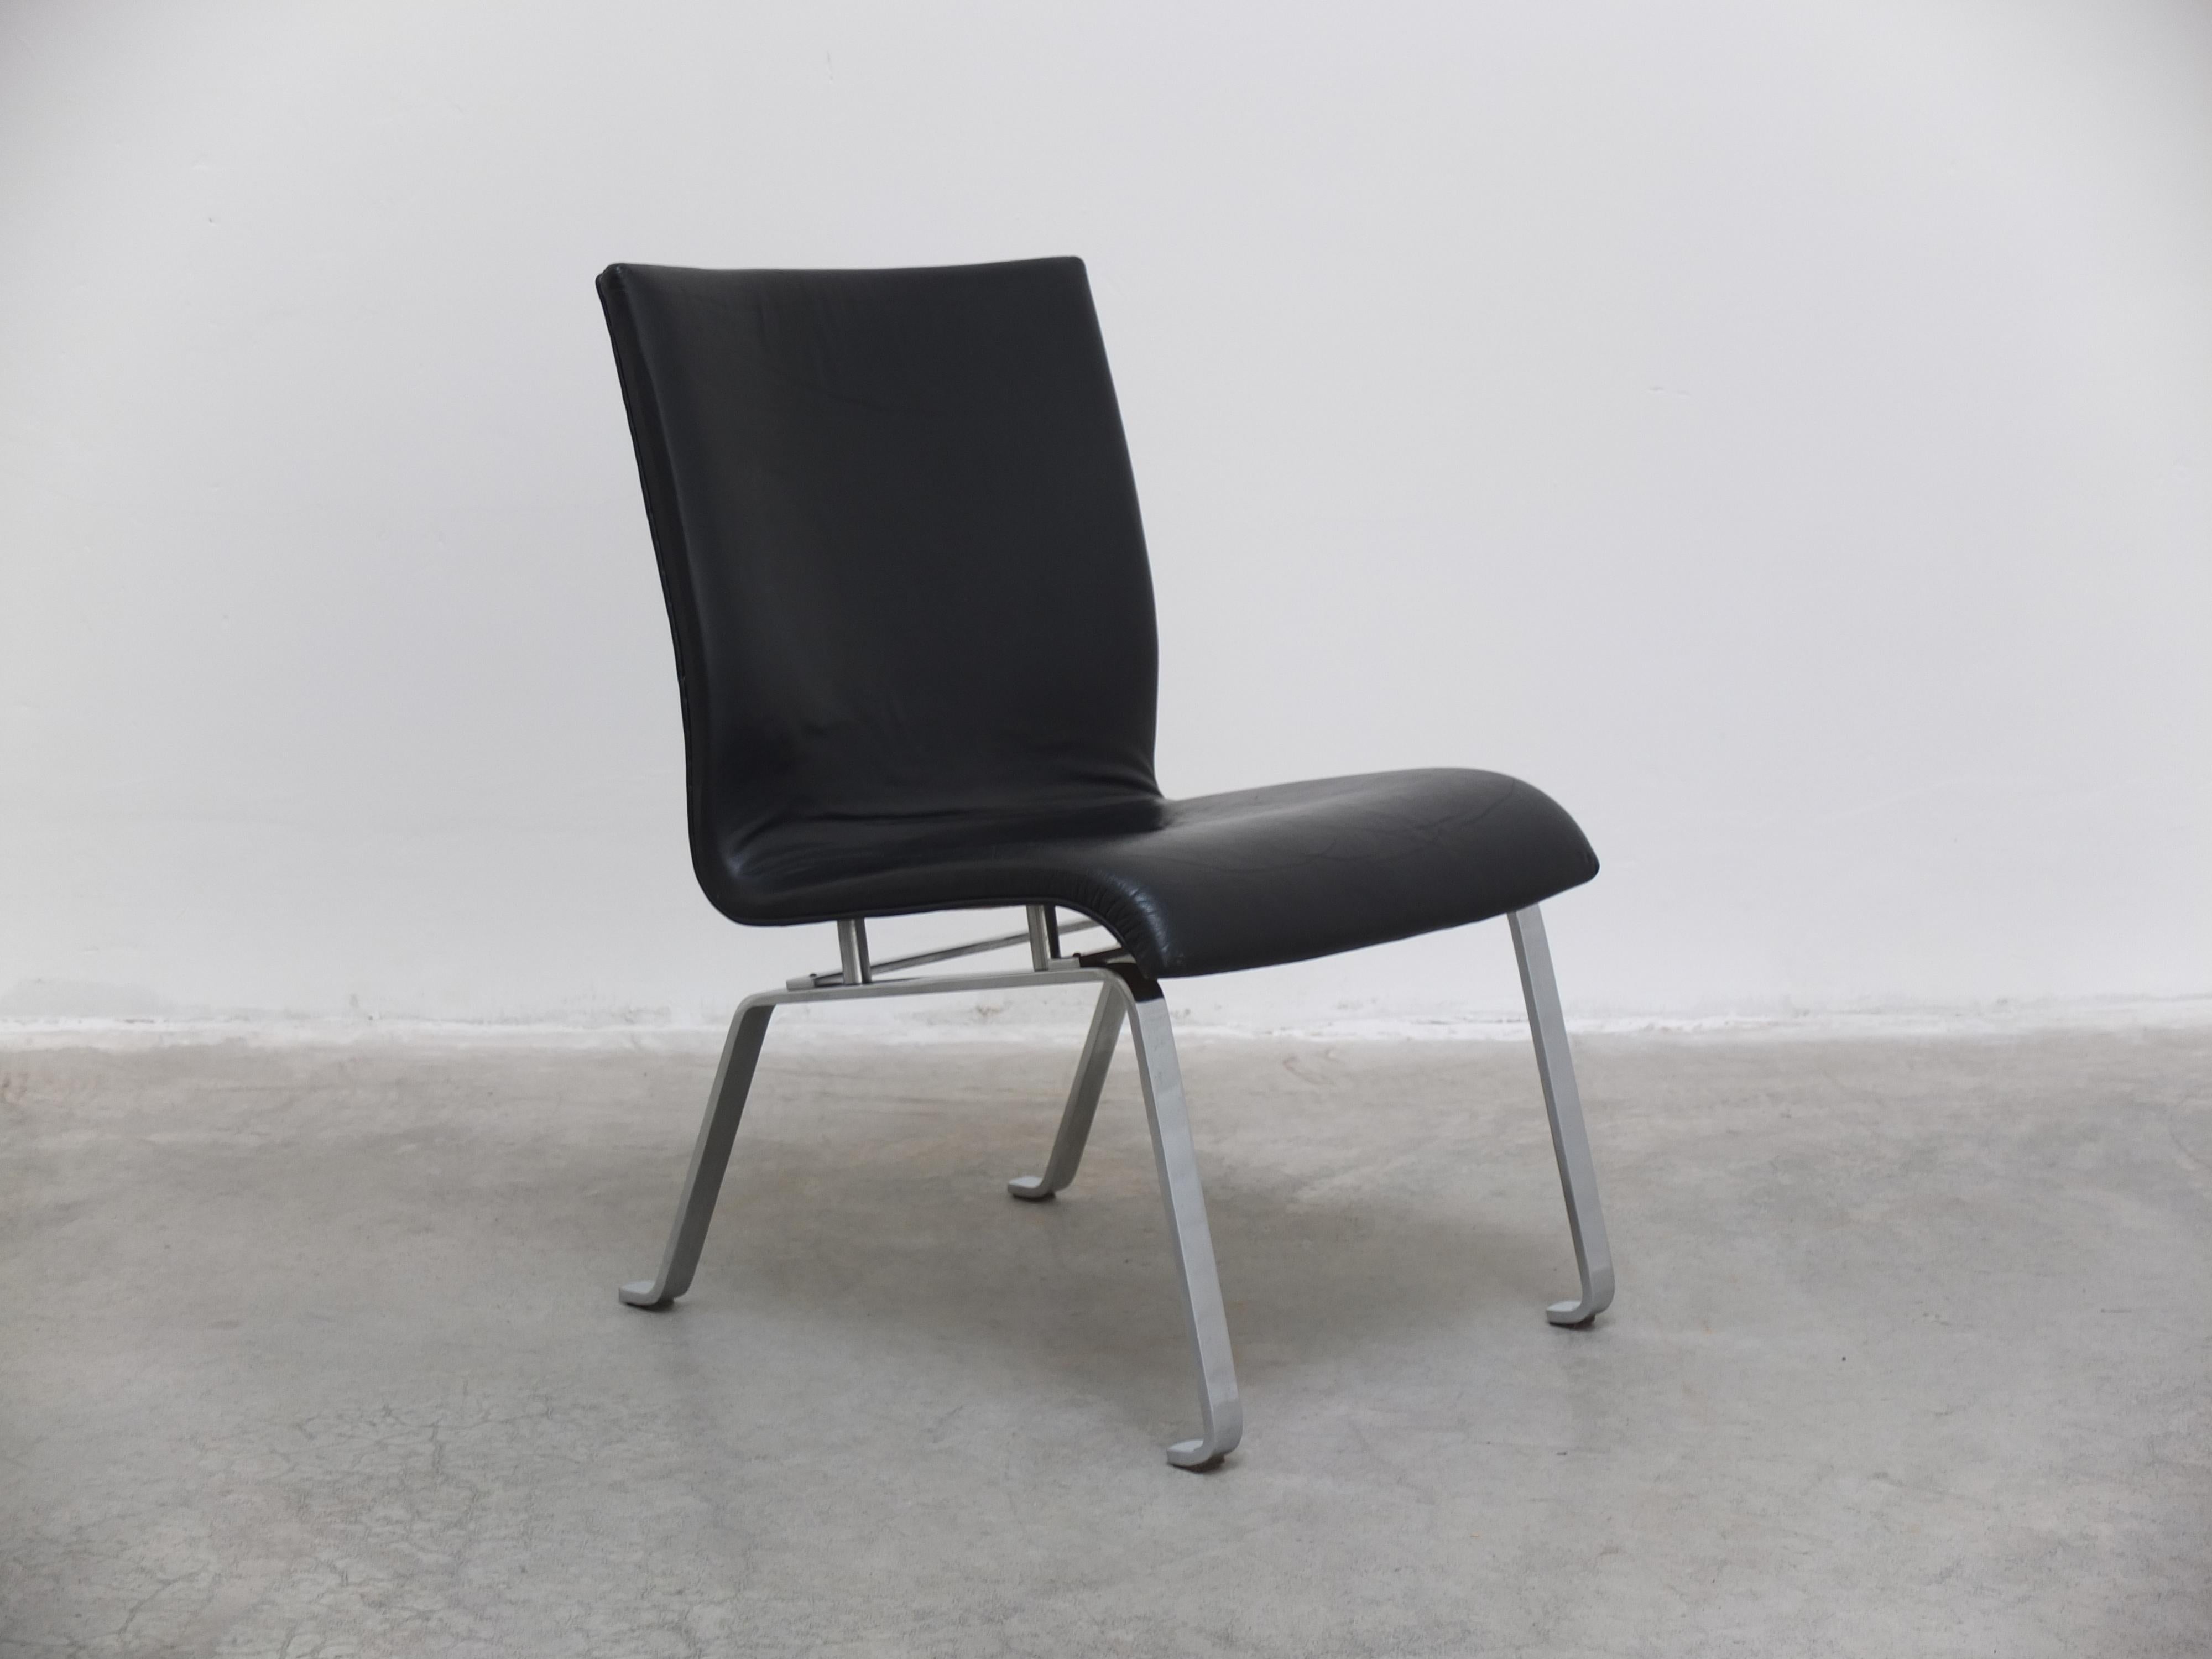 An exceptional find is this modernist lounge chair produced in Denmark around 1960. Made of genuine black leather combined with a chromed flat steel base. This minimalist design shows similarities with the works of renown Danish architects such as